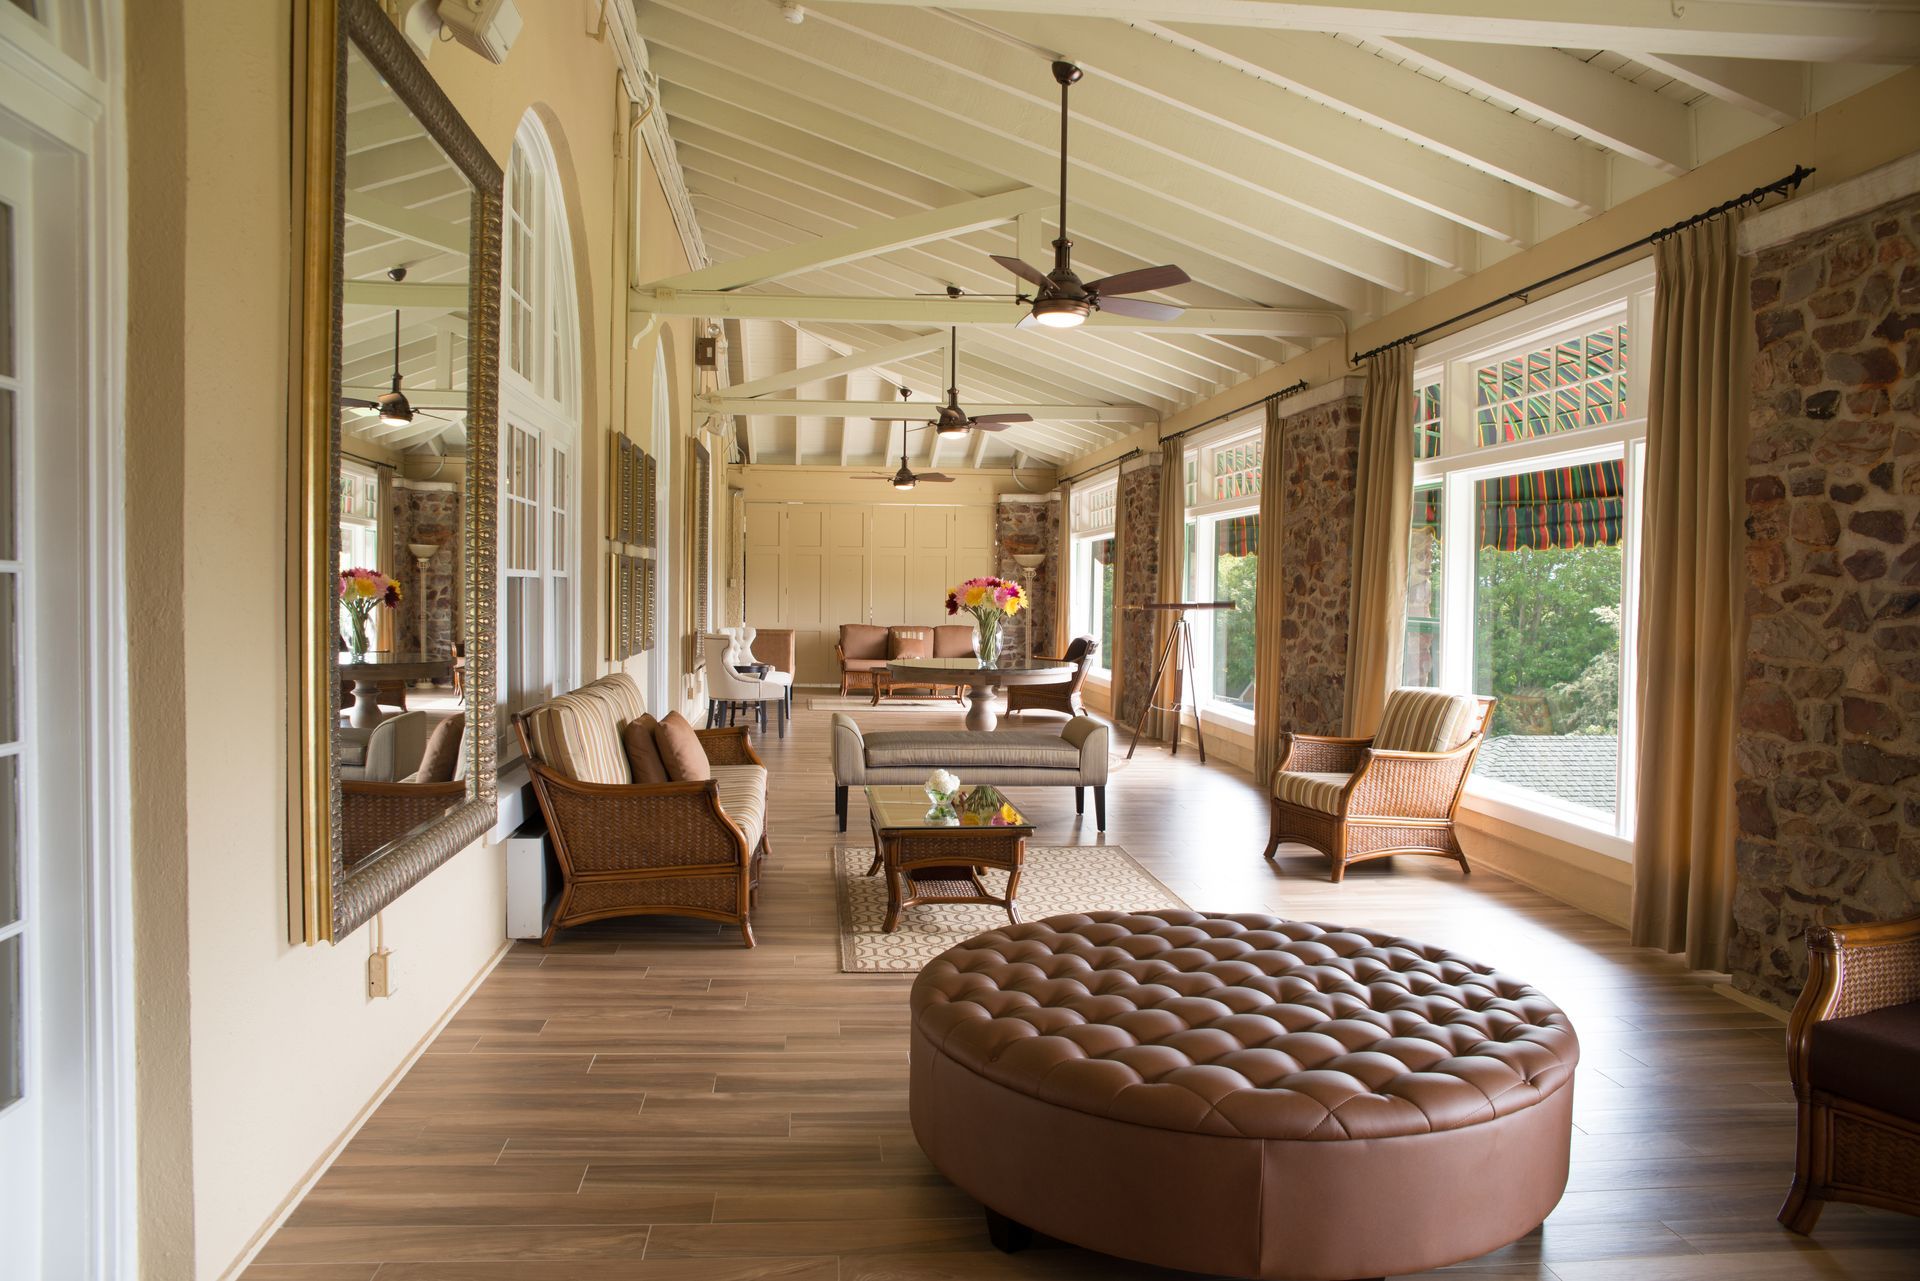 Picture of the veranda off of the grande lounge at Digby Pines Golf Resort and Spa.